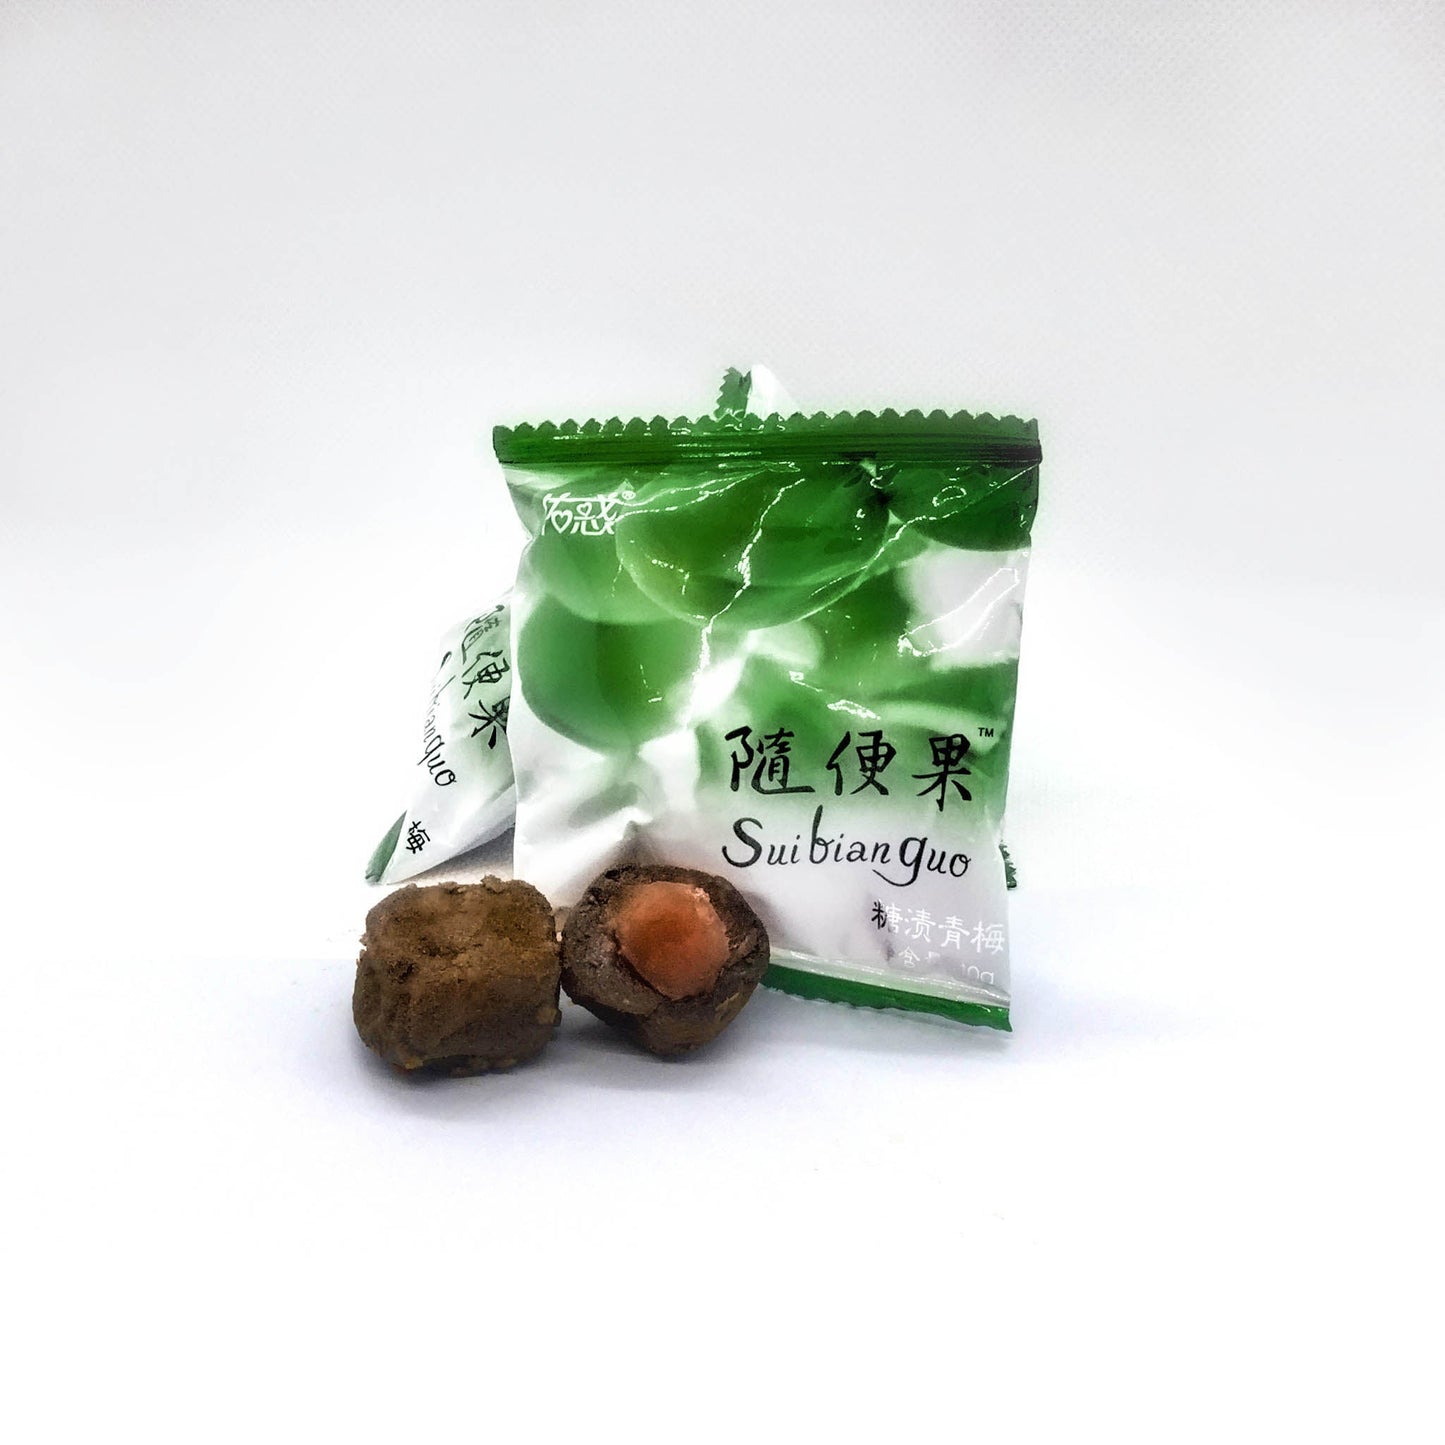 Free Sample of Suibianguo Candied Detox Plum - 5 Pieces (Excludes Shipping)